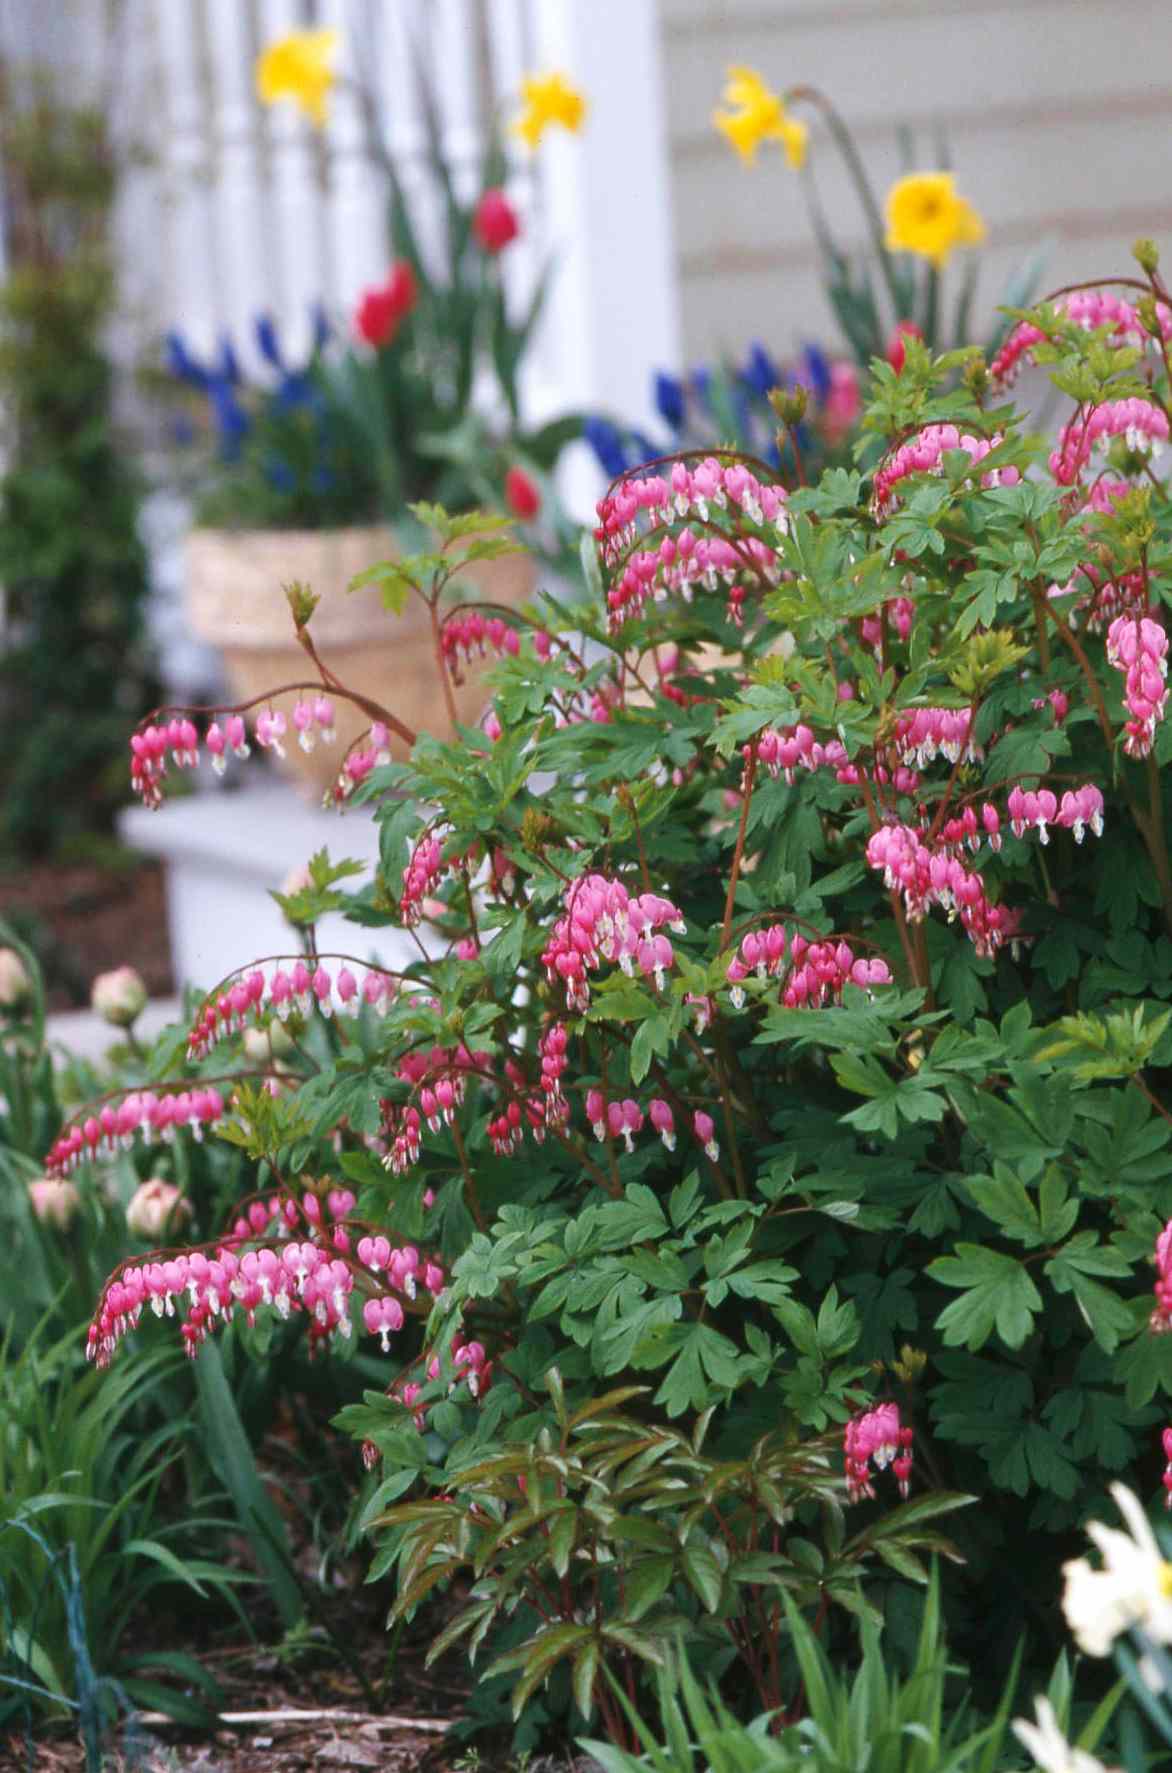 Plan Your Prettiest Garden Yet with this Guide to Perennial Flowers by Season